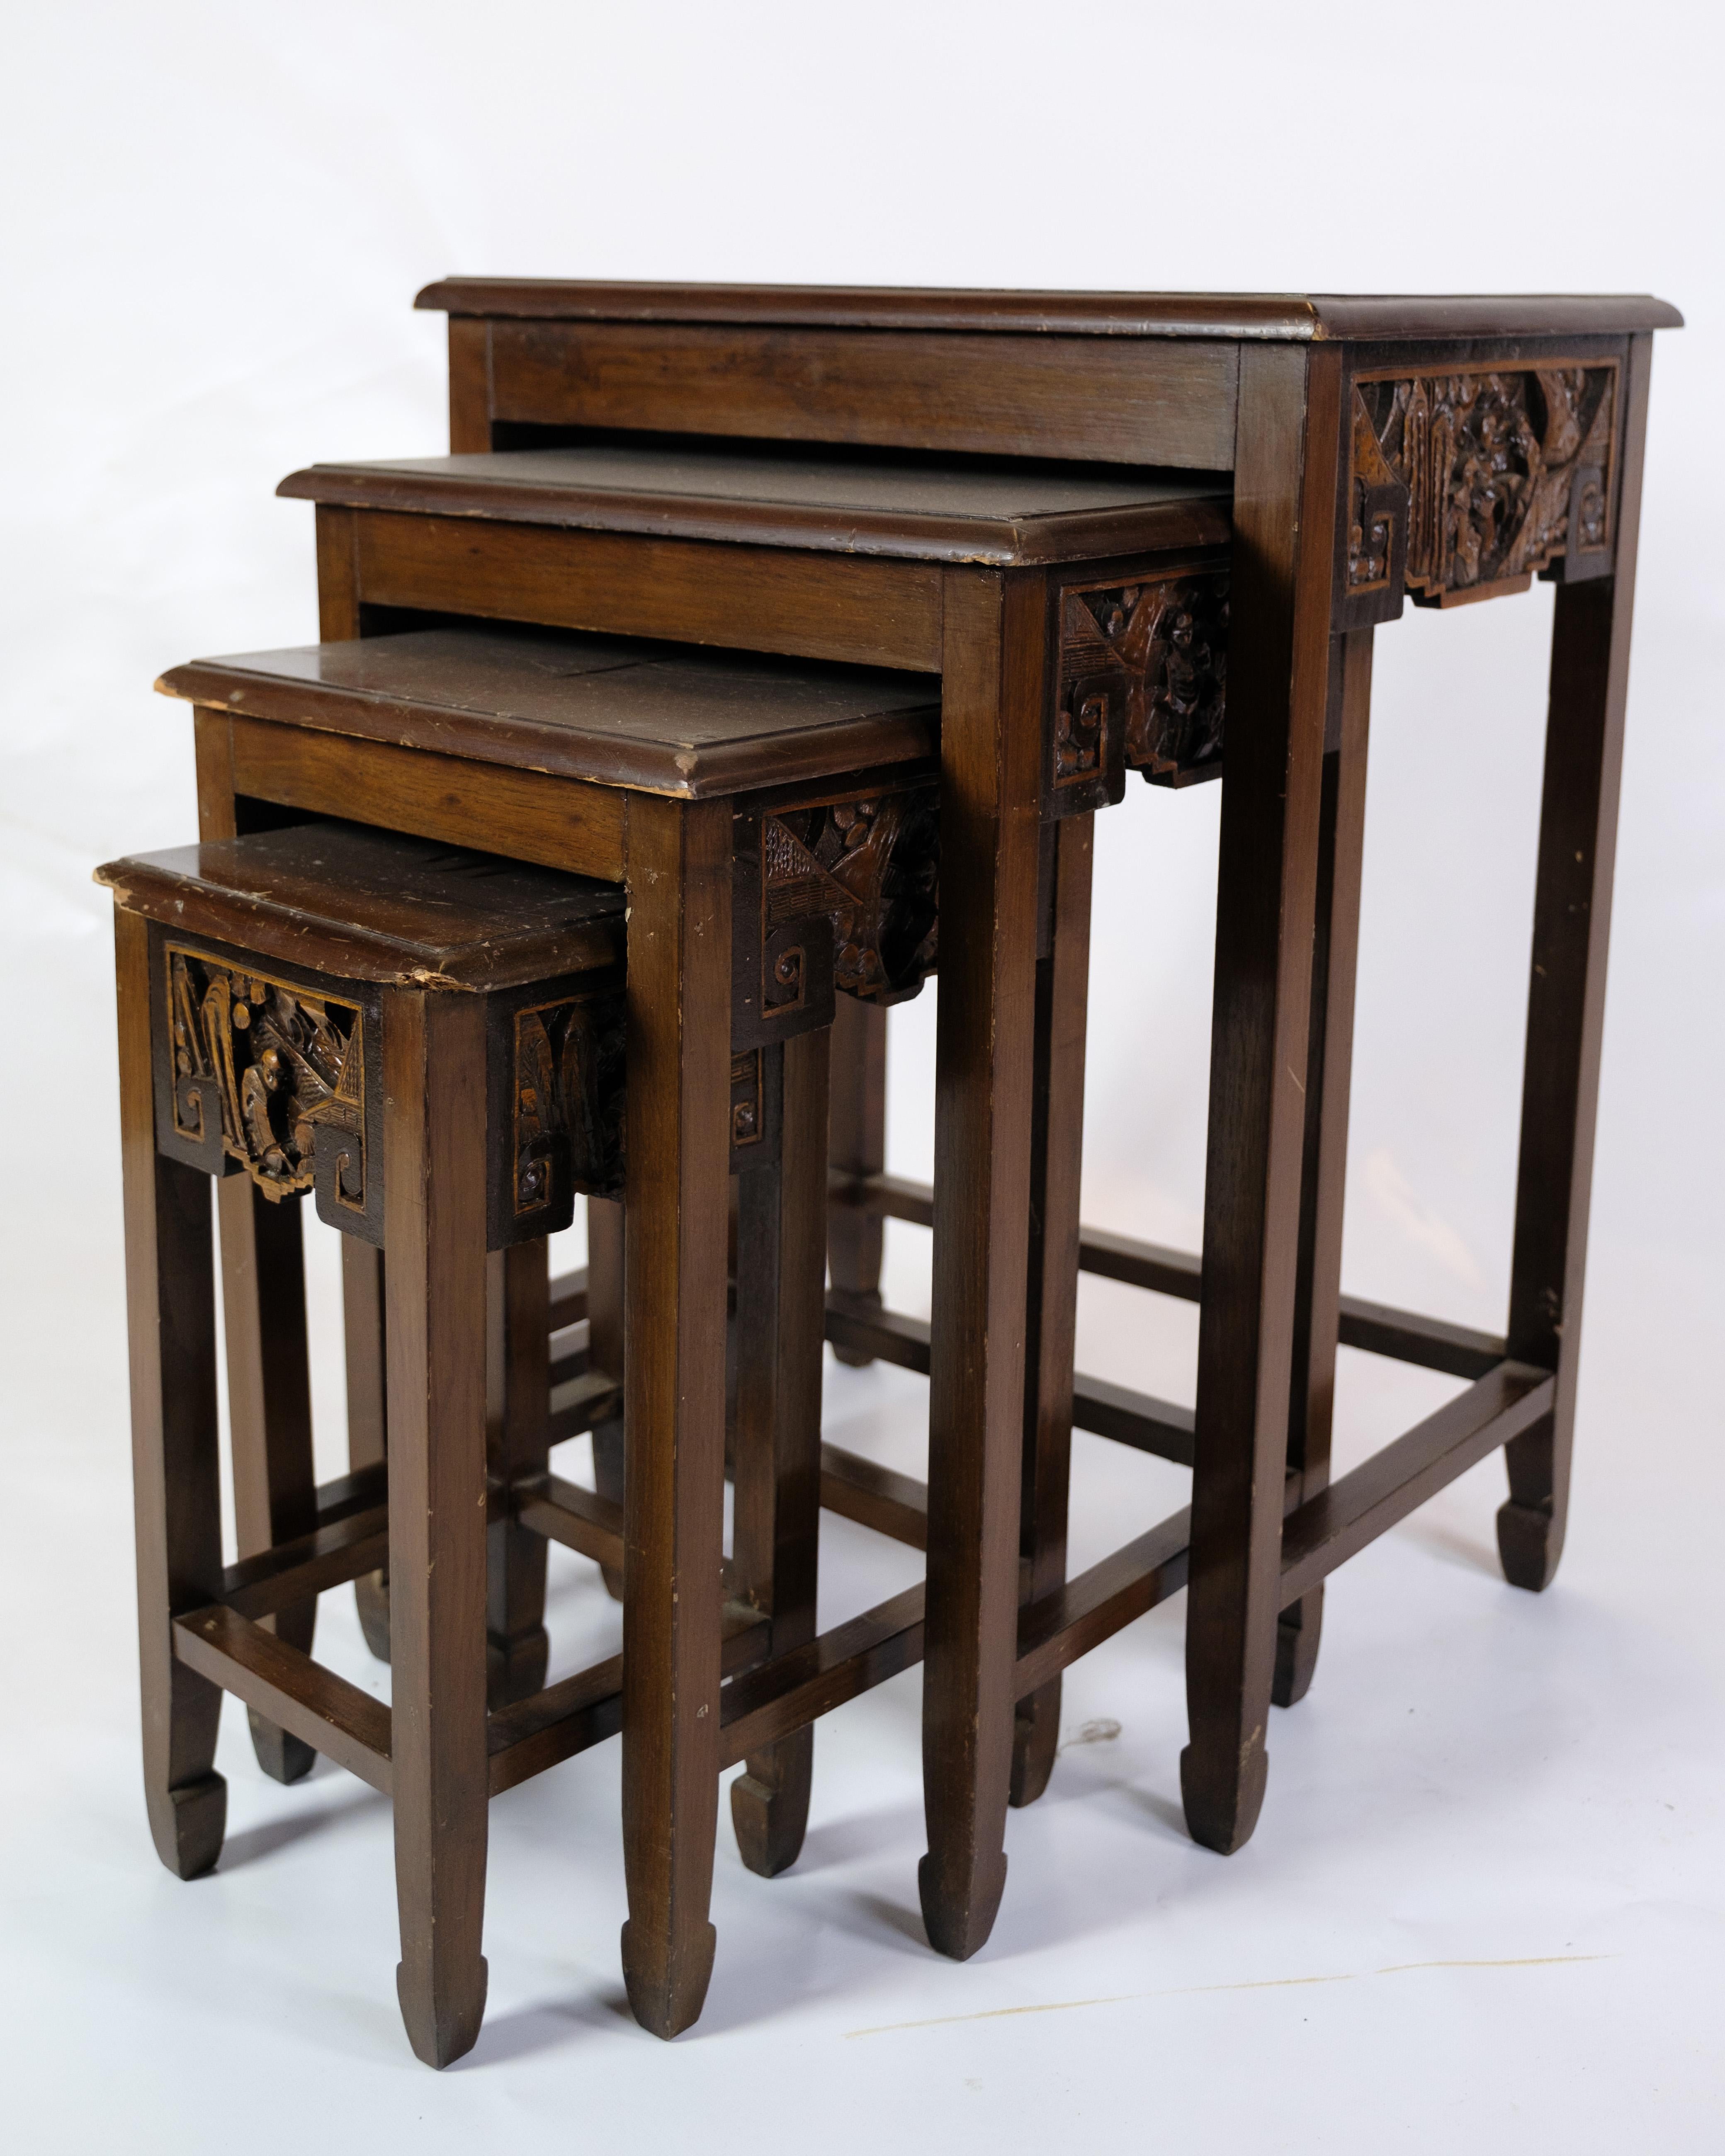 These four antique side tables/side tables are a fascinating collection of 1930s Chinese style furniture. Made from mahogany wood, each table exudes a unique beauty and elegance that enriches any room with a touch of exotic flair.

Each table is